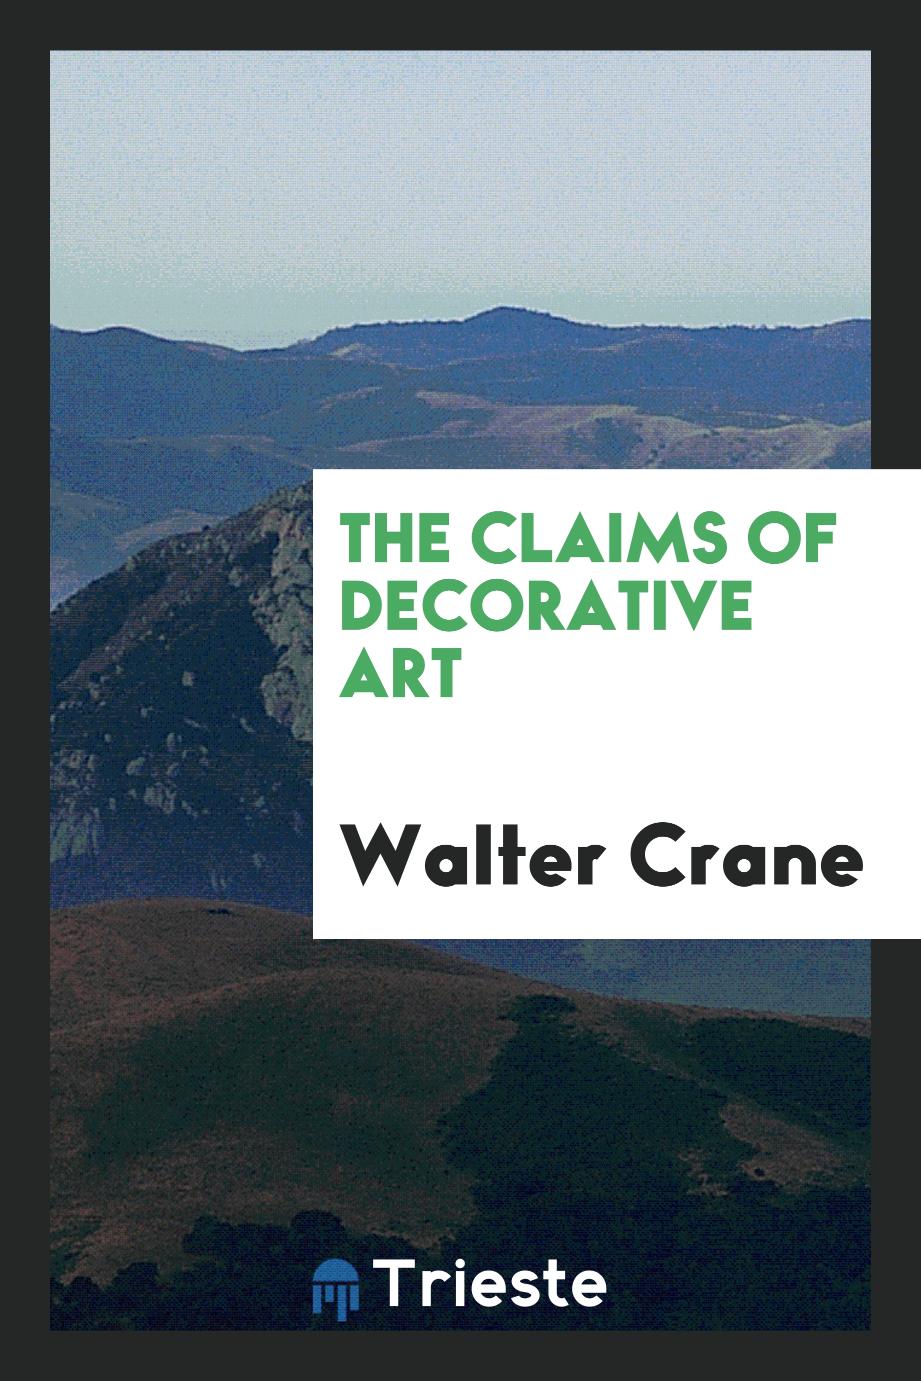 The claims of decorative art